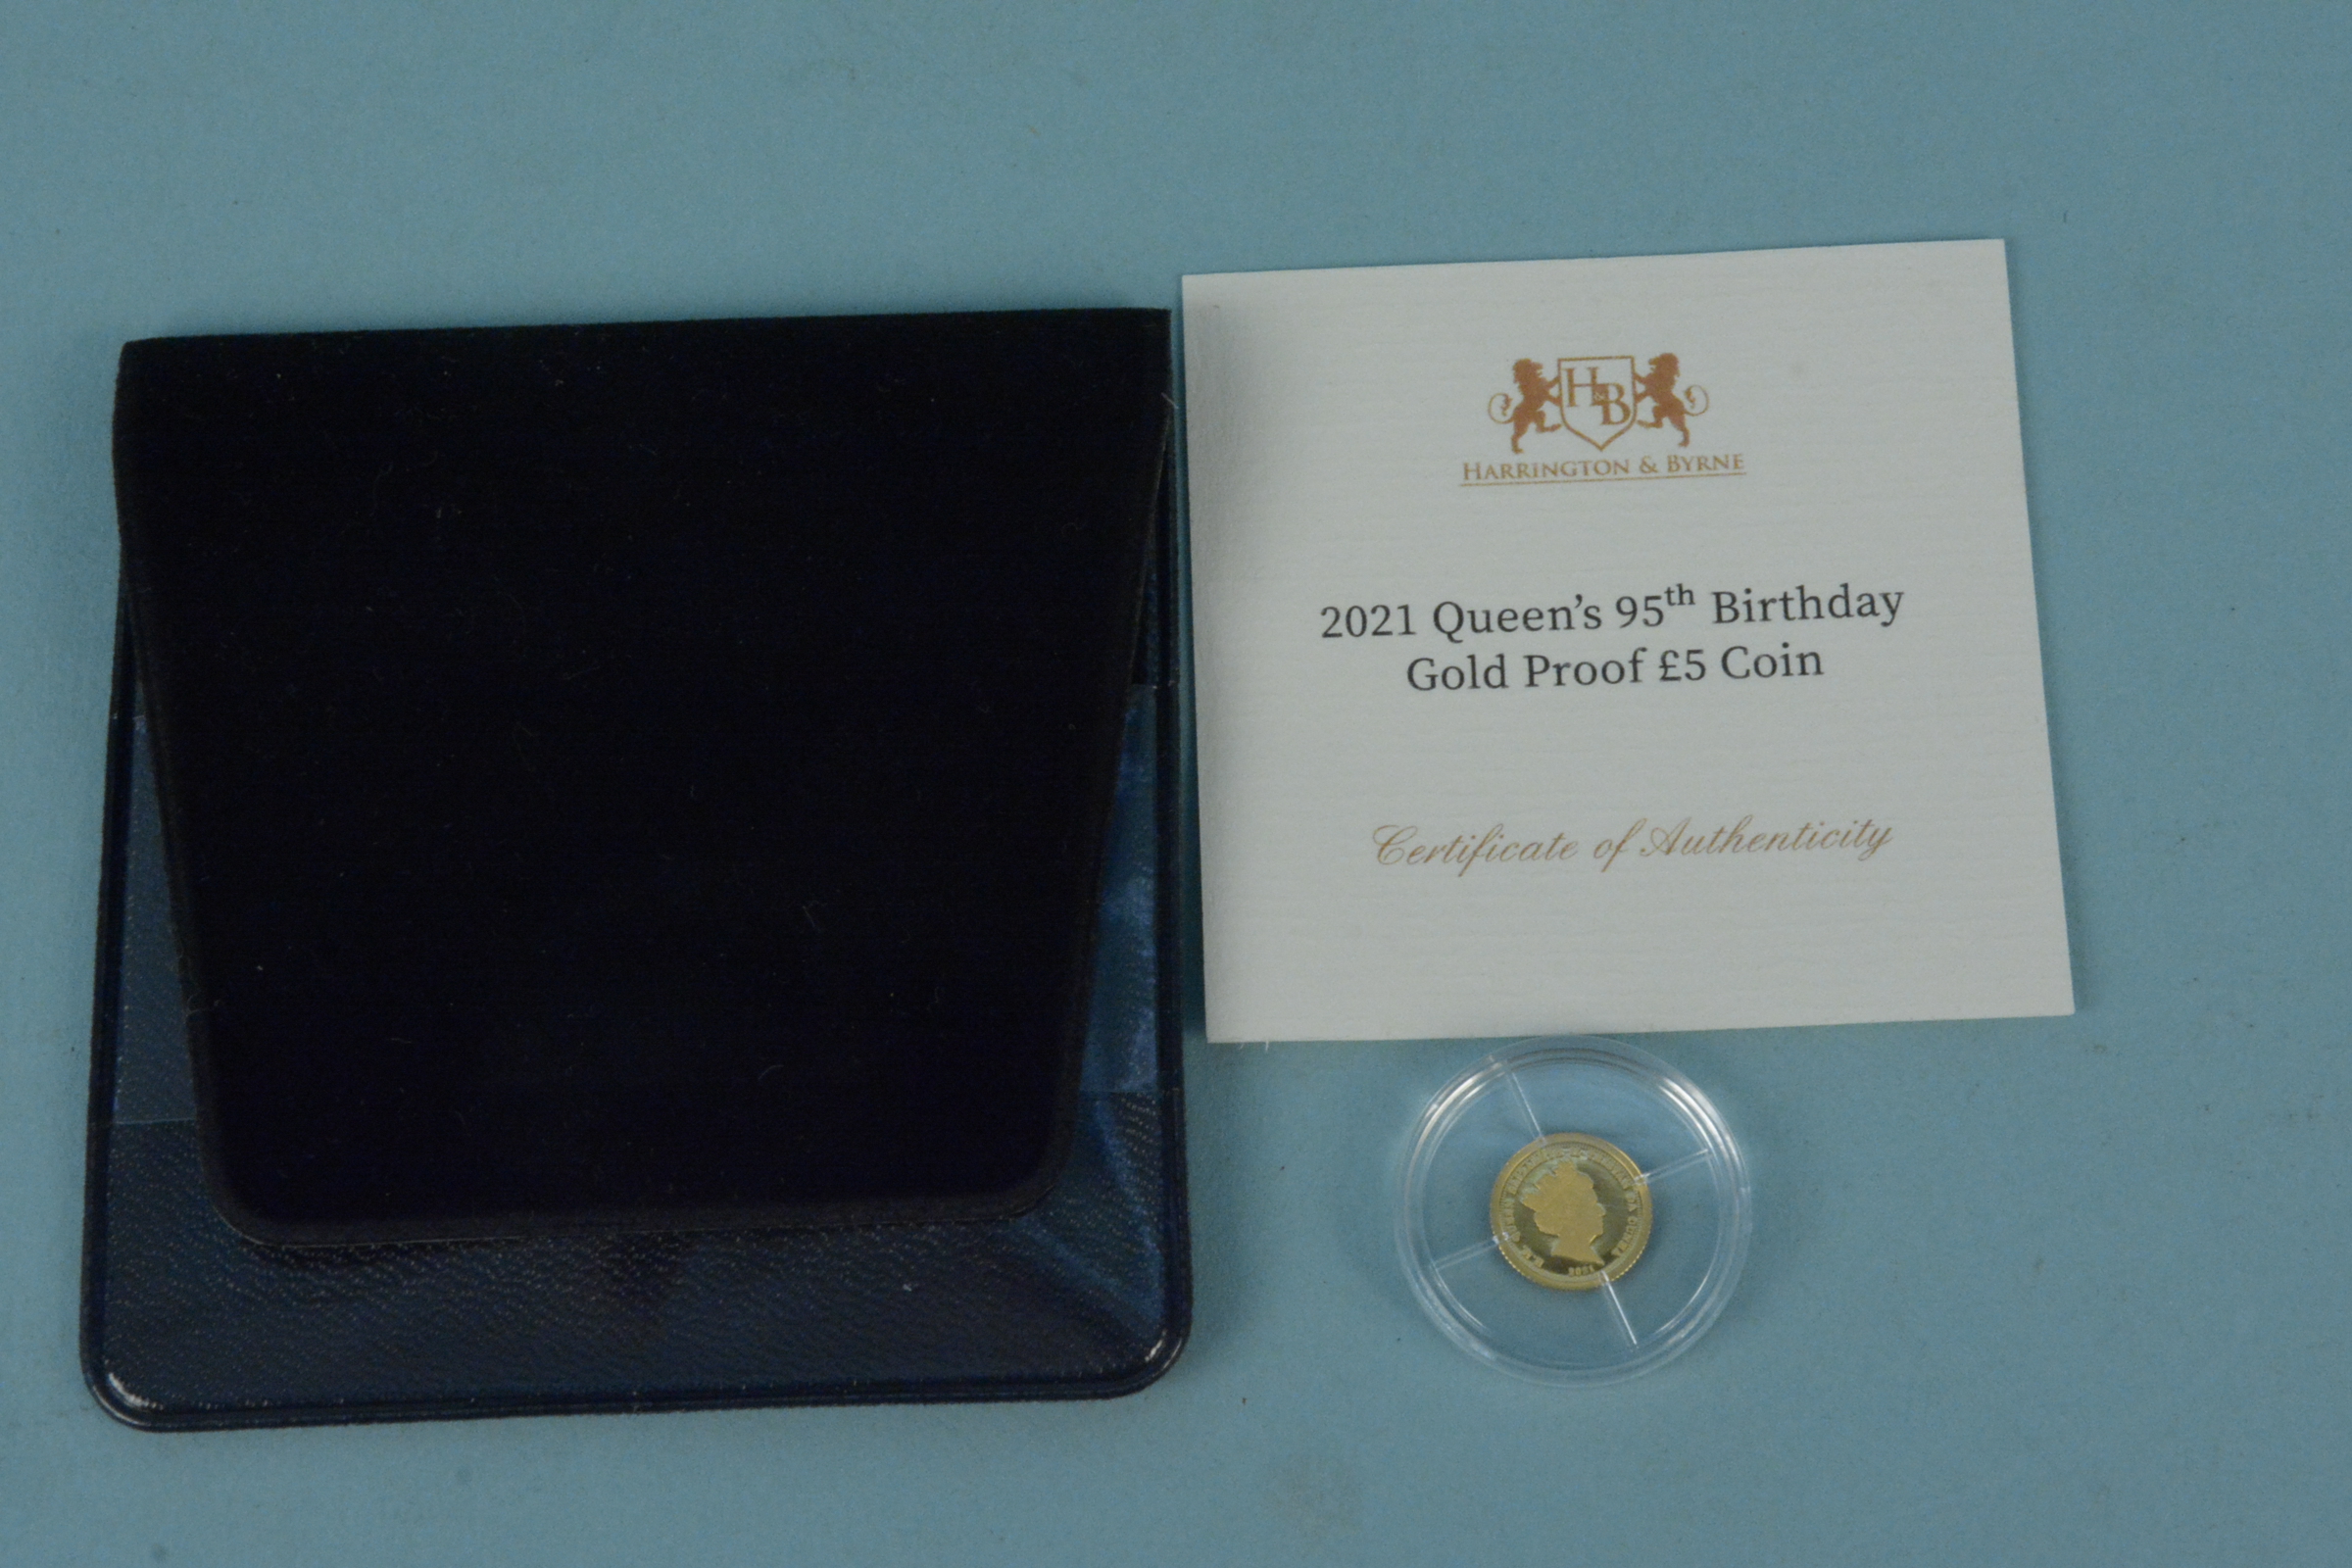 A 2021 Tristan da Cunha Queens 95th birthday 24ct gold proof £5 coin with certificate,